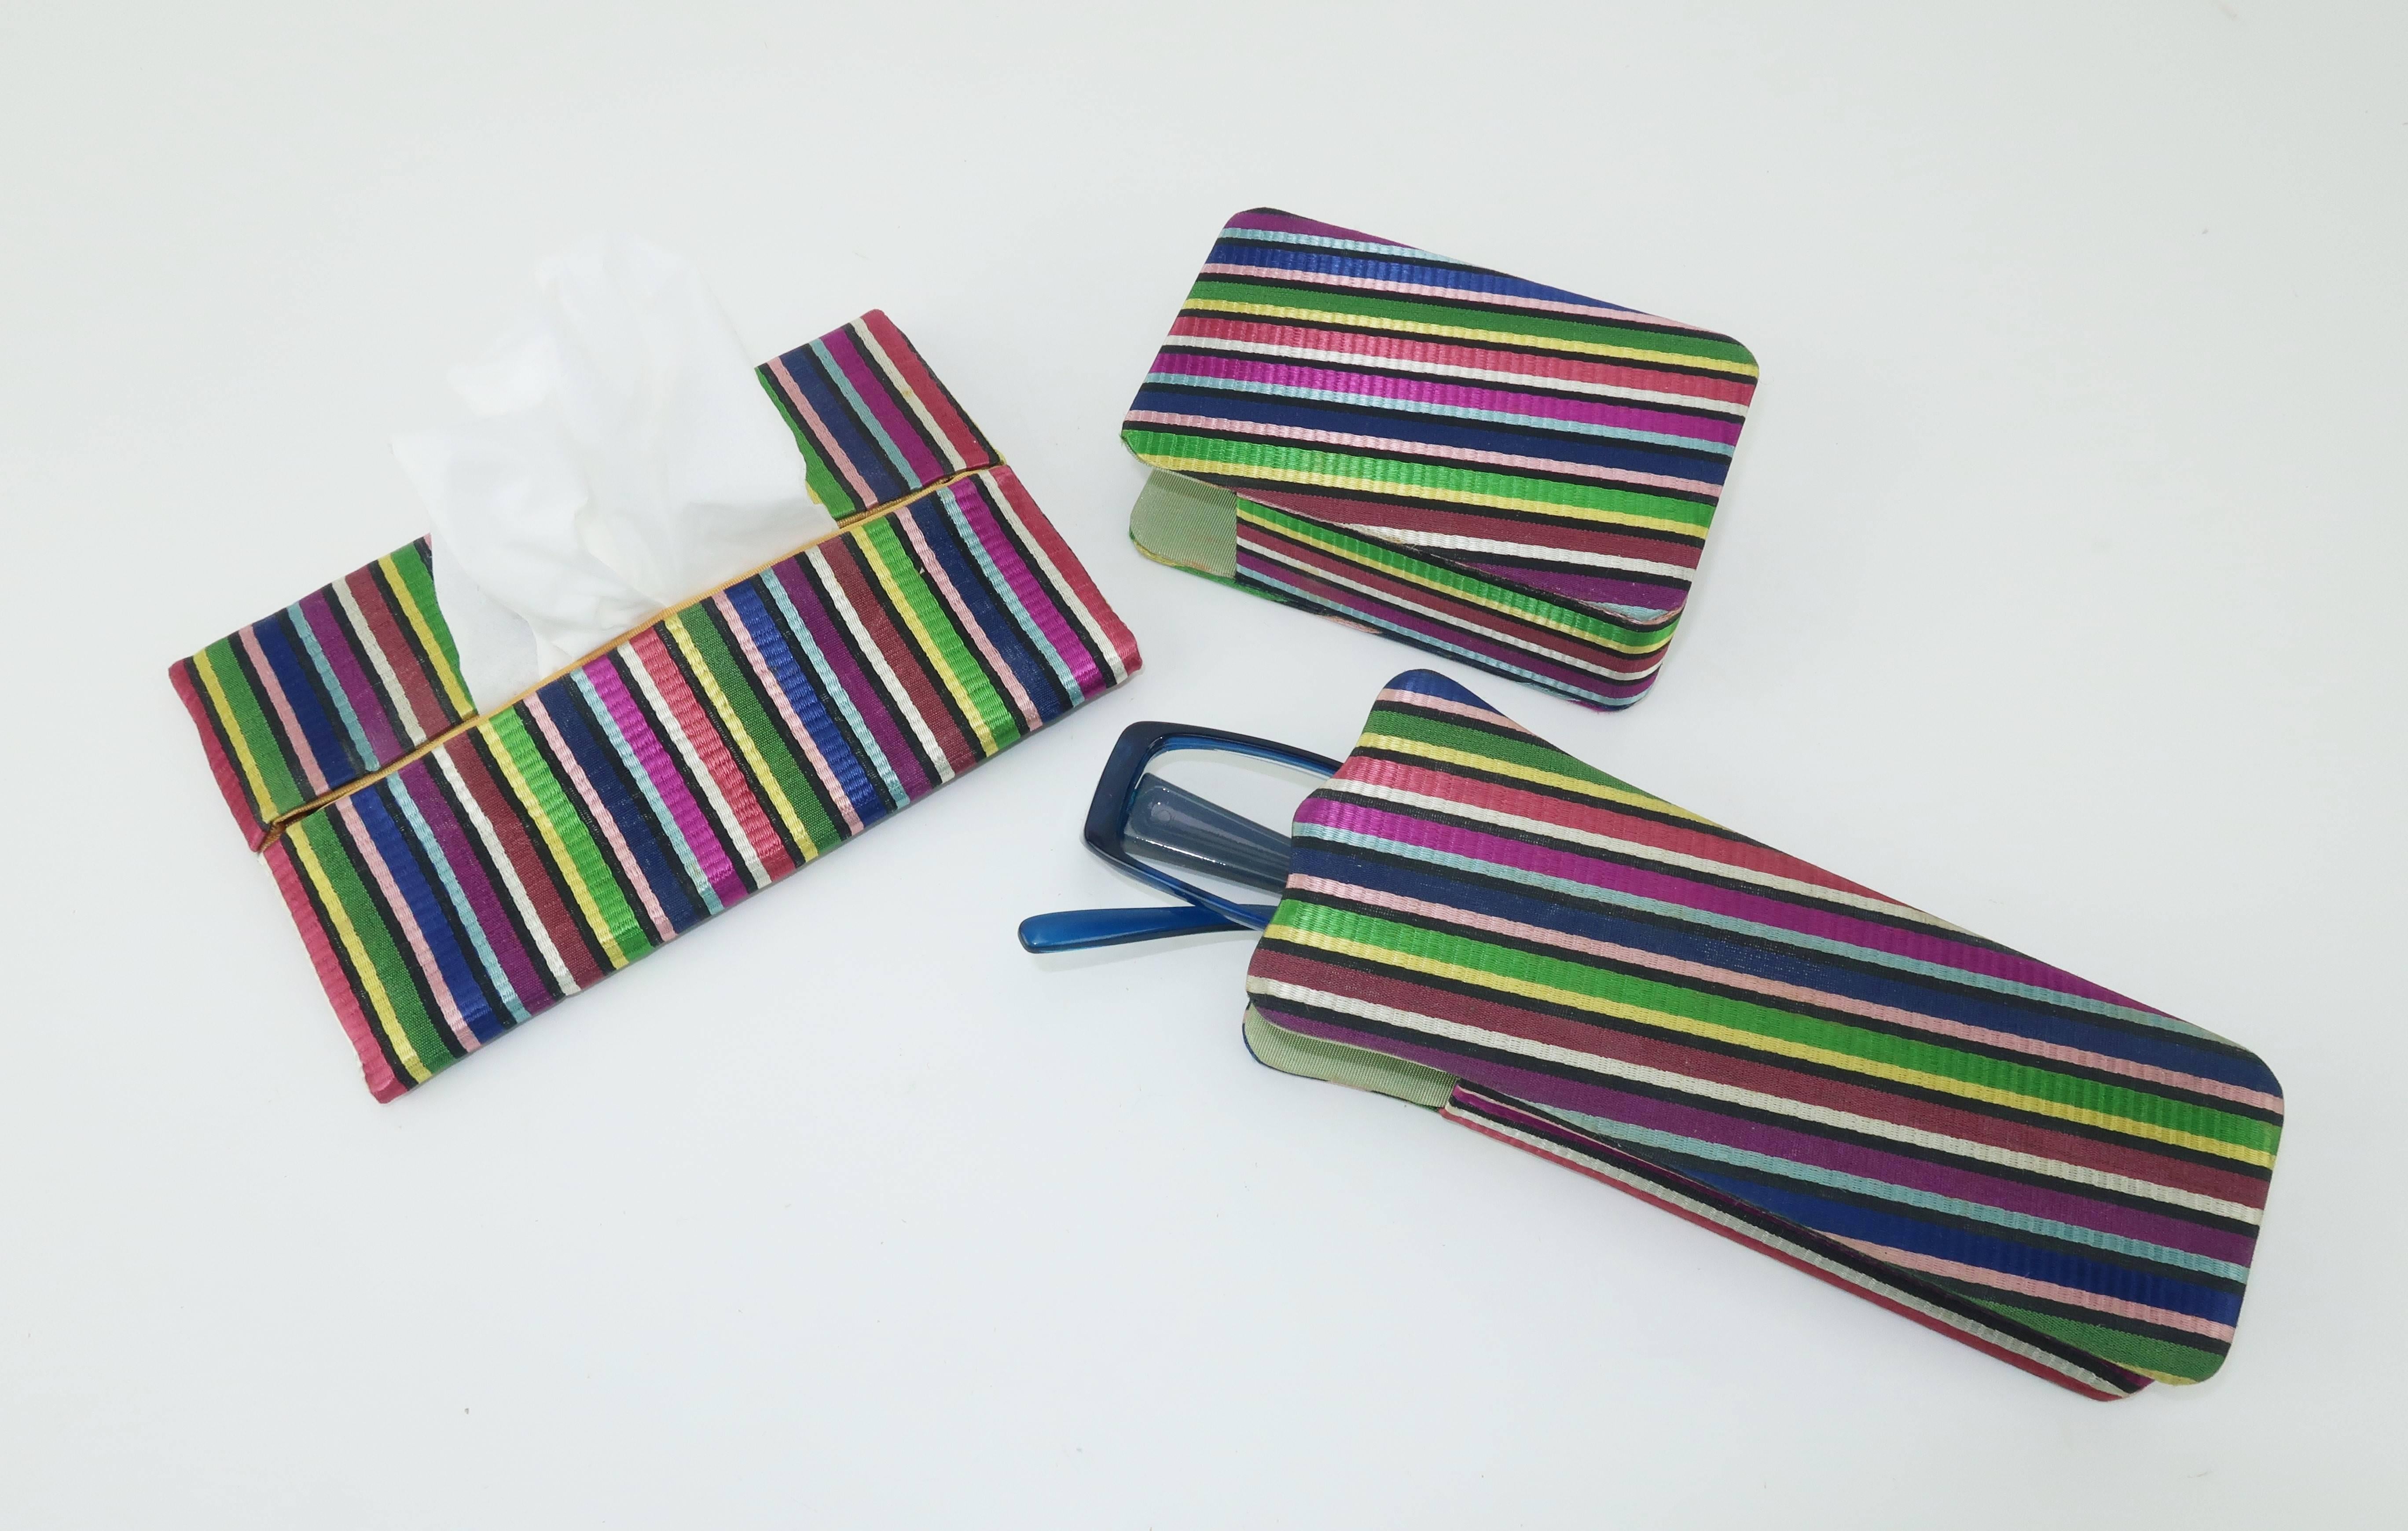 This cute 1950's three piece set is loaded with charm.  The coordinating jewel tone textured stripe is reminiscent of satin ribbons and incorporates colors ranging from blue and green to magenta and yellow.  The set consists of a cigarette box,